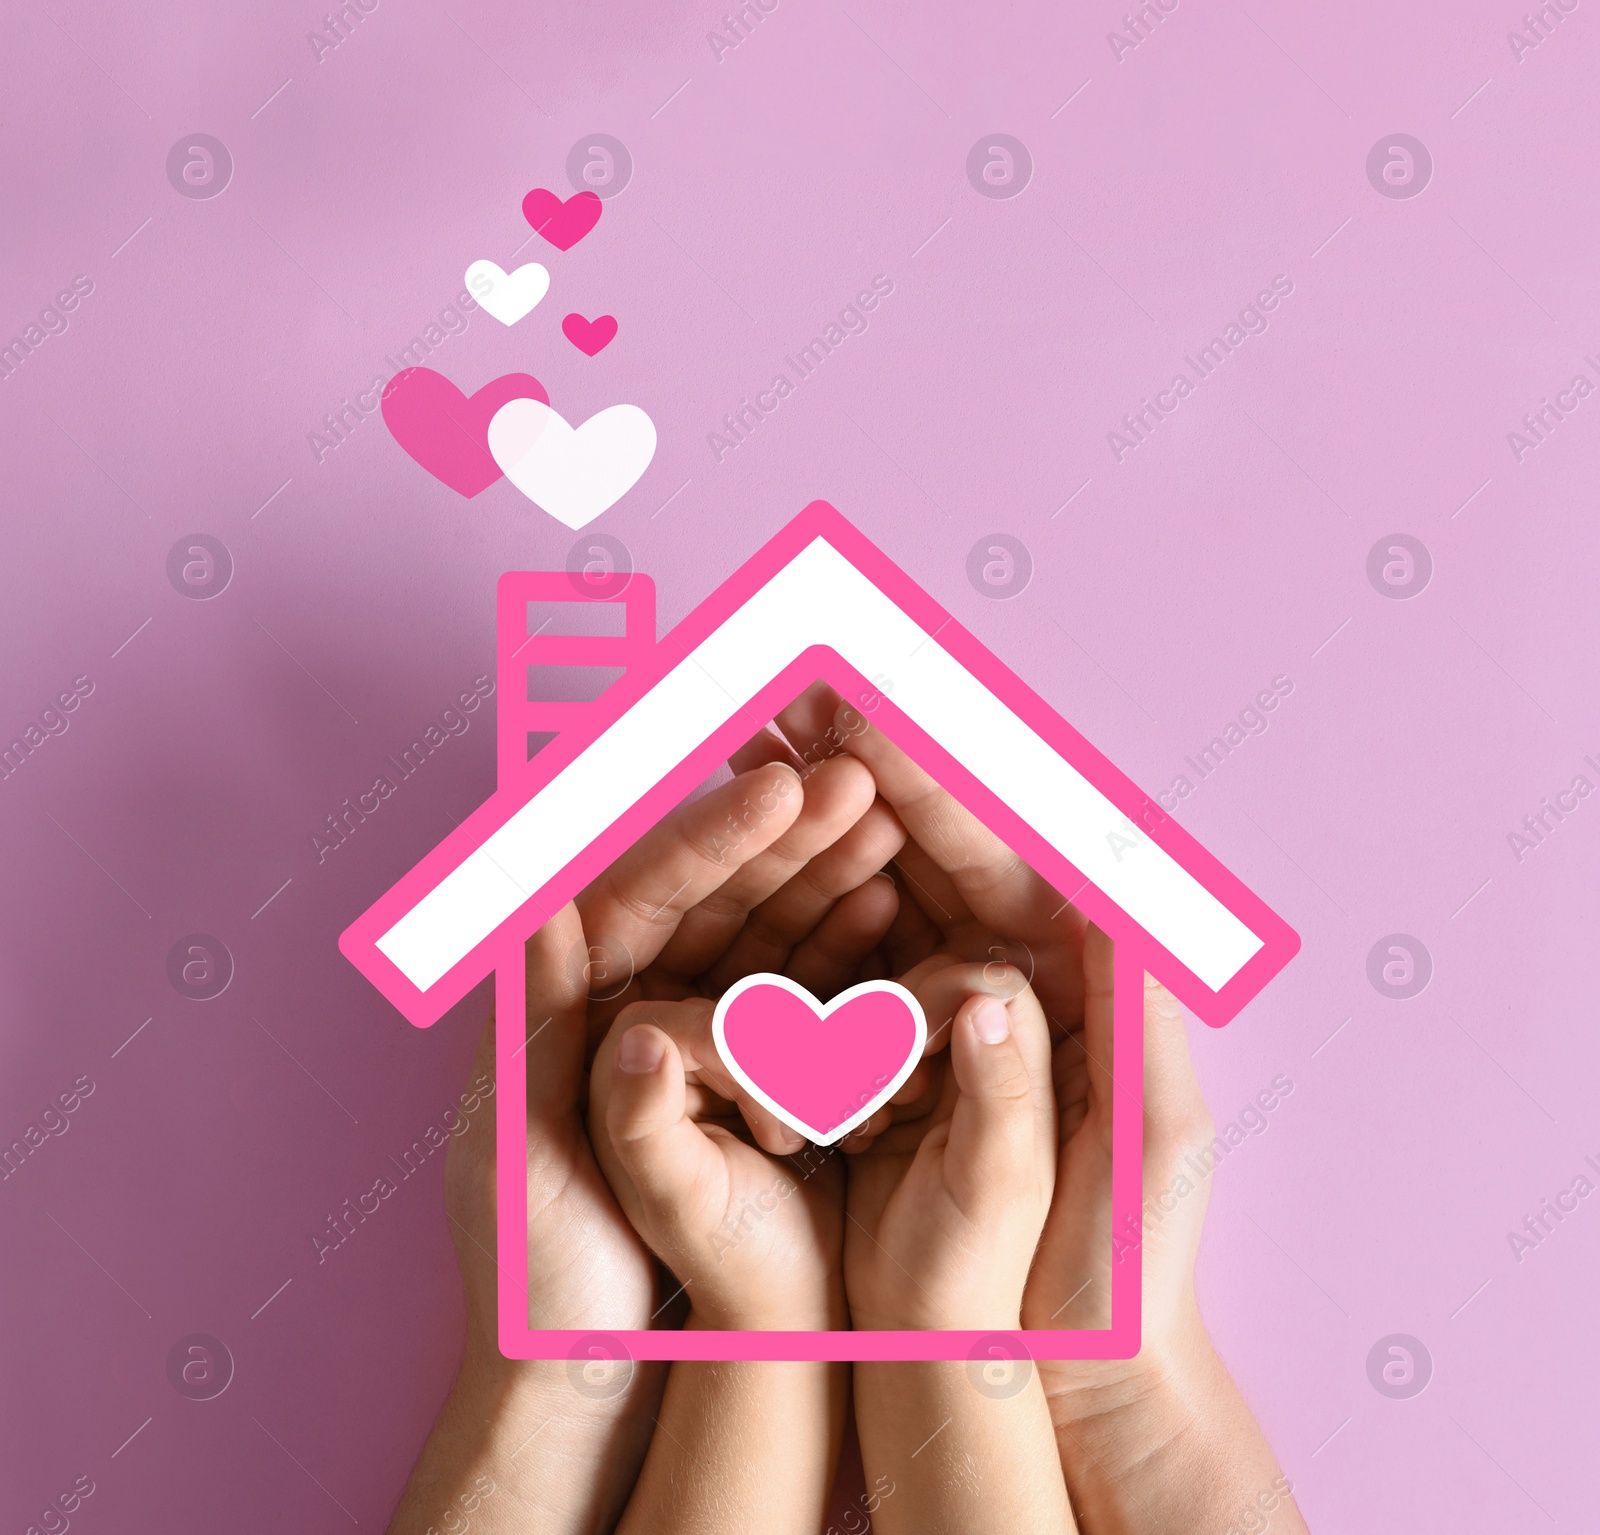 Image of Mother holding hands with child and illustration of house on pink background, top view.  Adoption concept